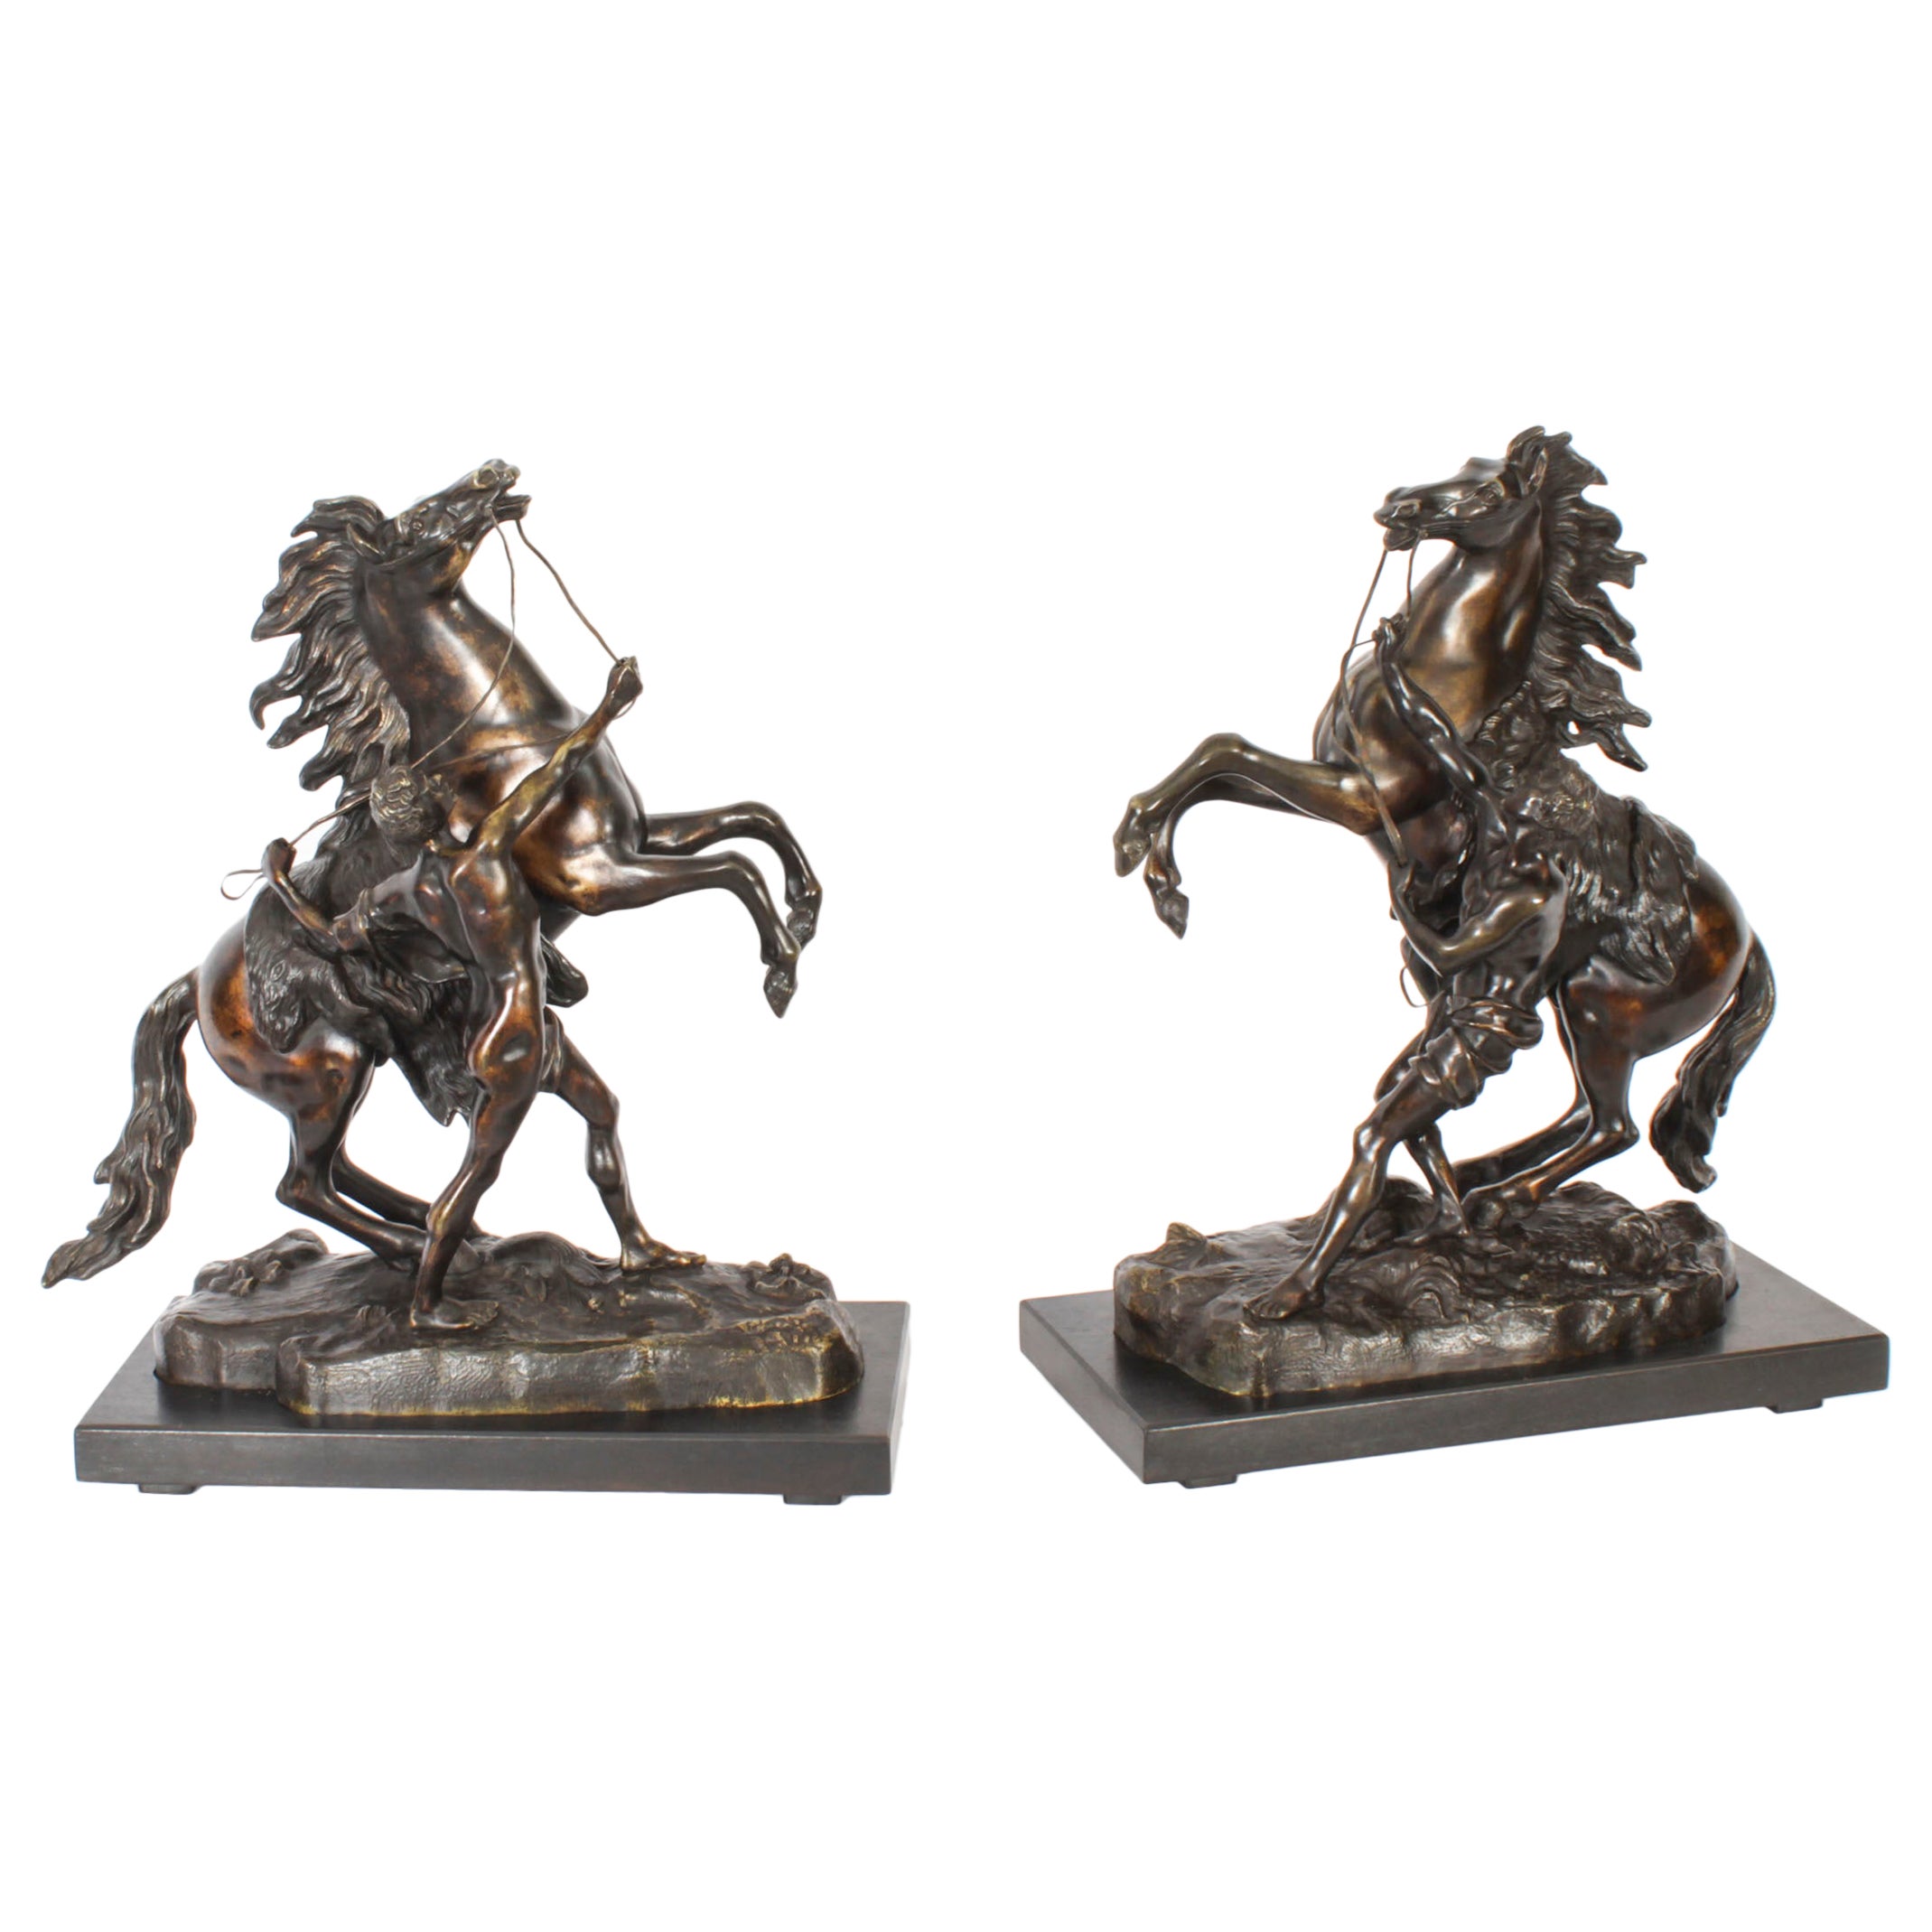 Antique Pair of French Bronze Marly Horses Sculptures by Cousteau 19th Century For Sale